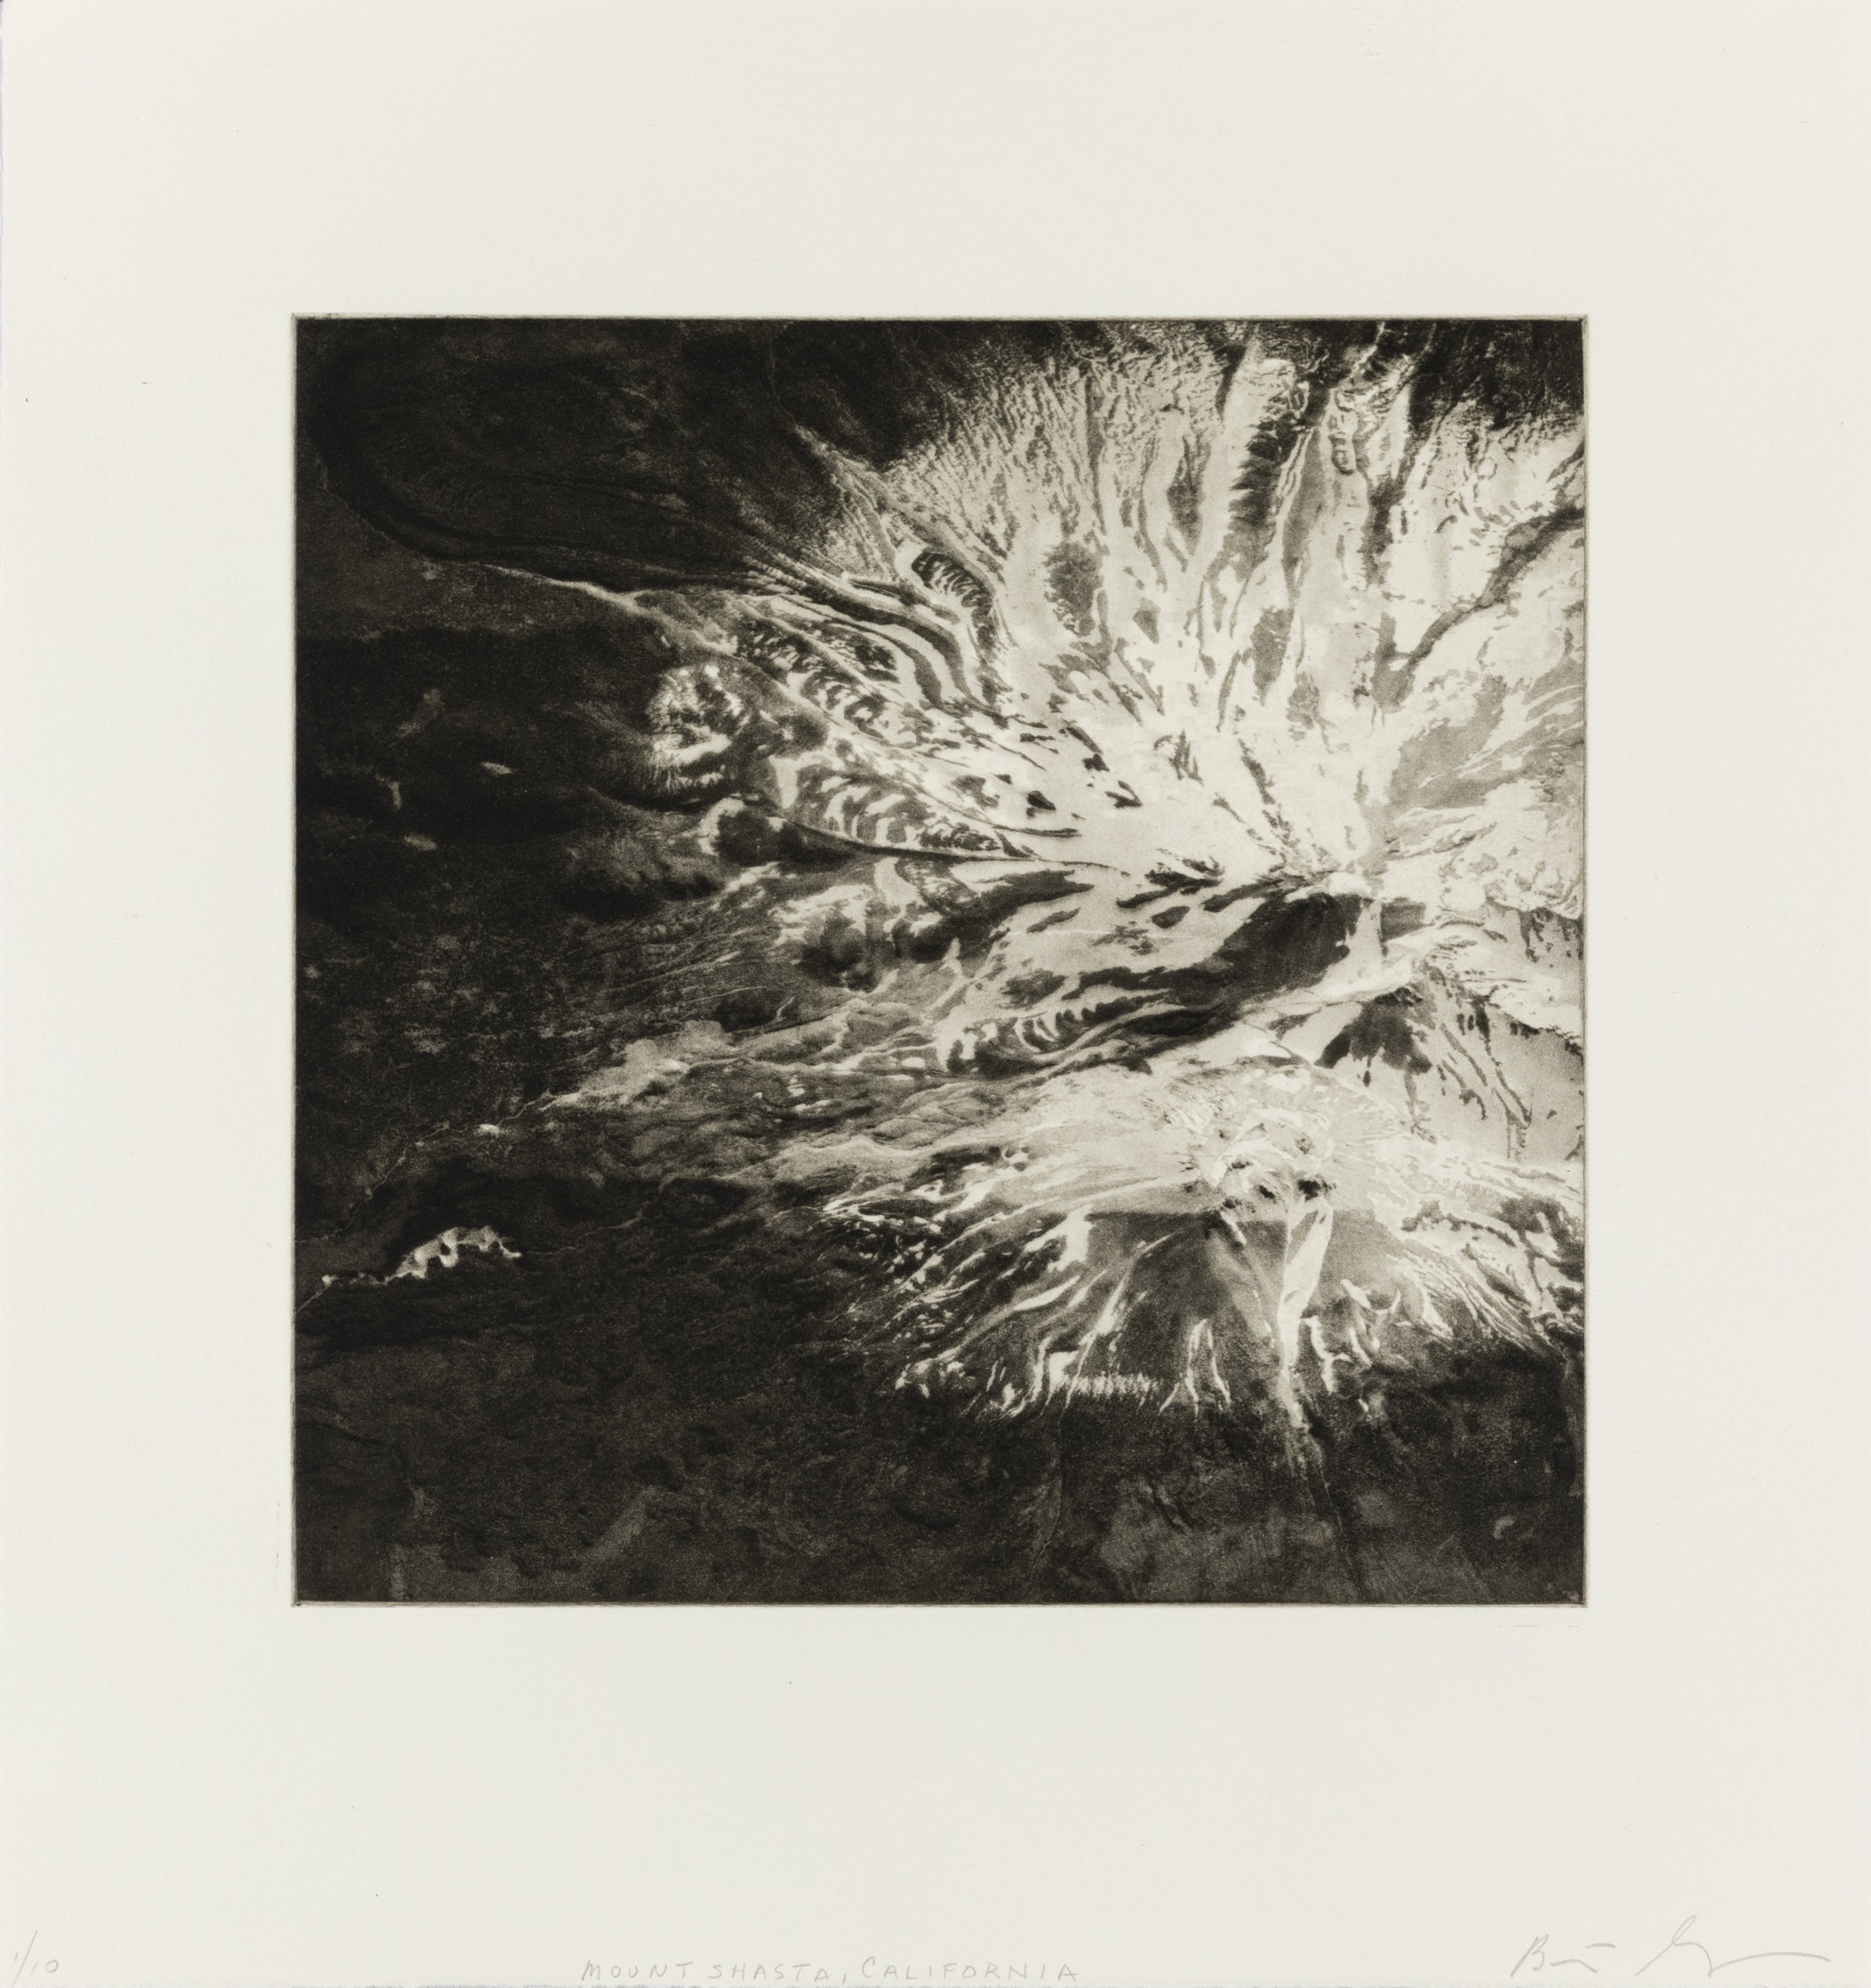    Mount Shasta, California, 2021   Copperplate photogravure etching on cotton rag paper, plate size; 10.6 x 10.6, paper size; 16 x 15.5, edition 10  